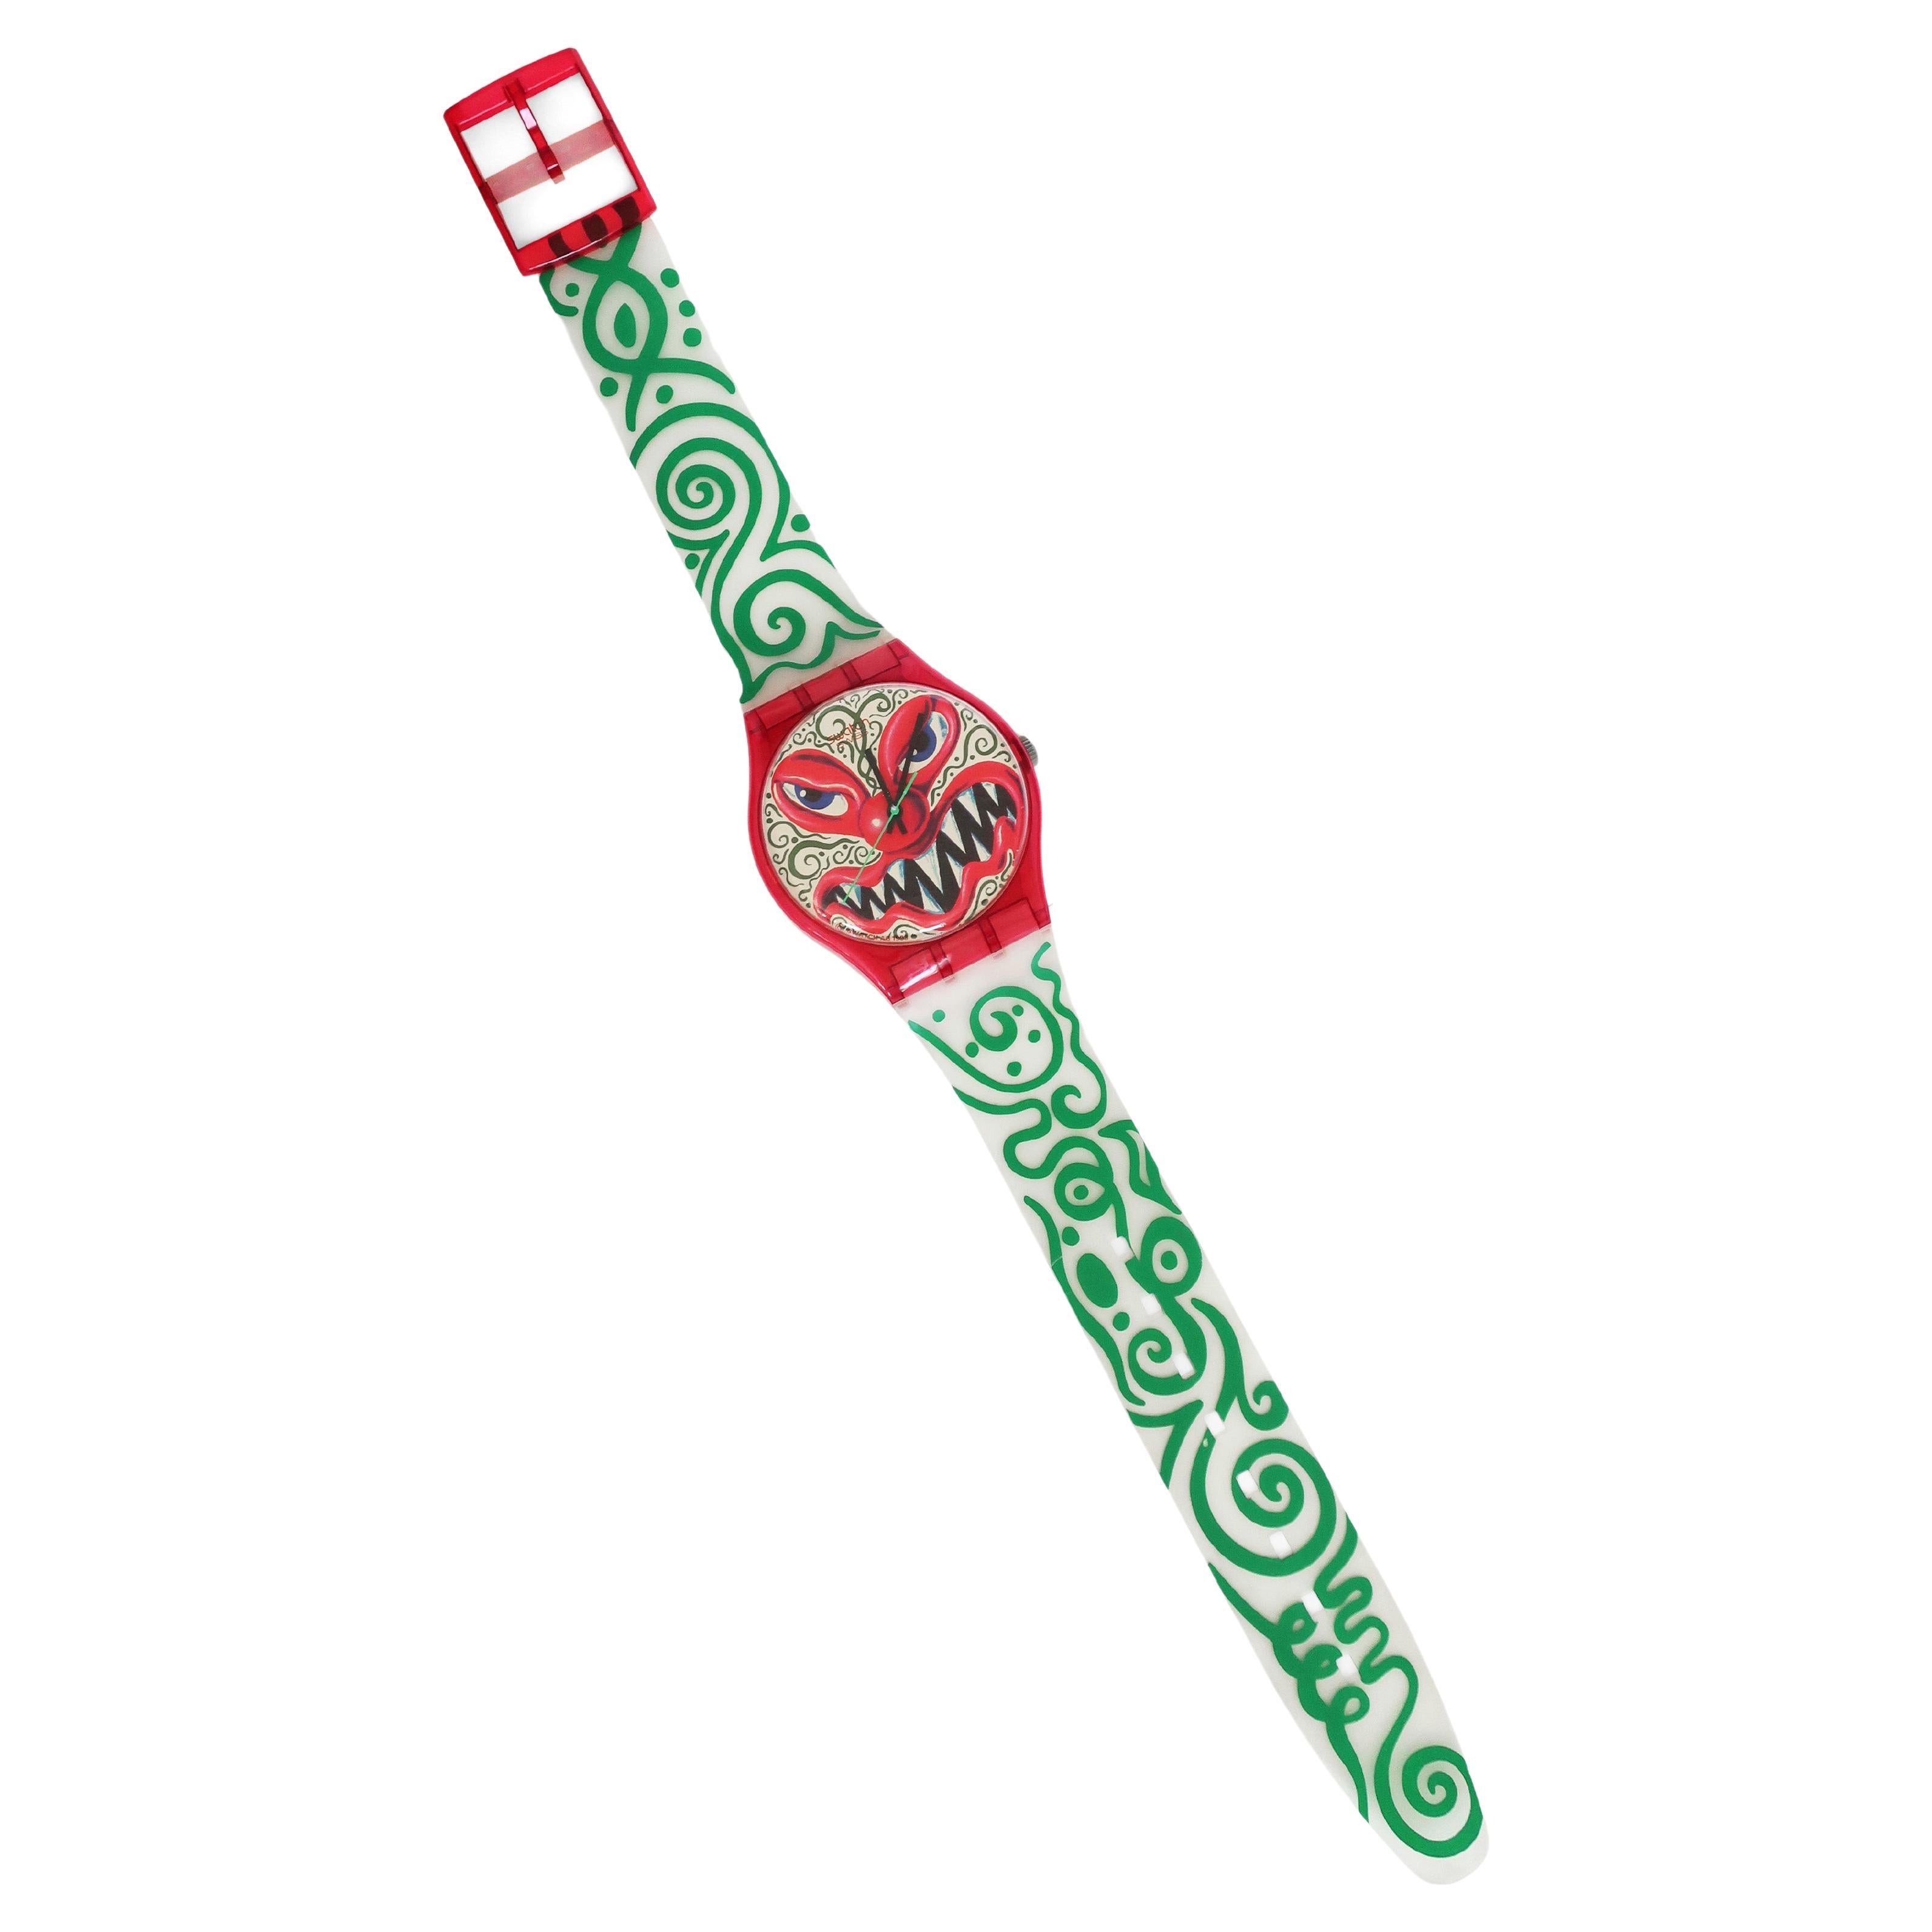 A charismatic and sinister design from 1993 by American artist Kenny Scharf for Swatch. Produced as a wristwatch and also in this Swatch Maxi over-sized seven foot tall wall clock version. Scharf's work is humorous, pushes boundaries, and is always